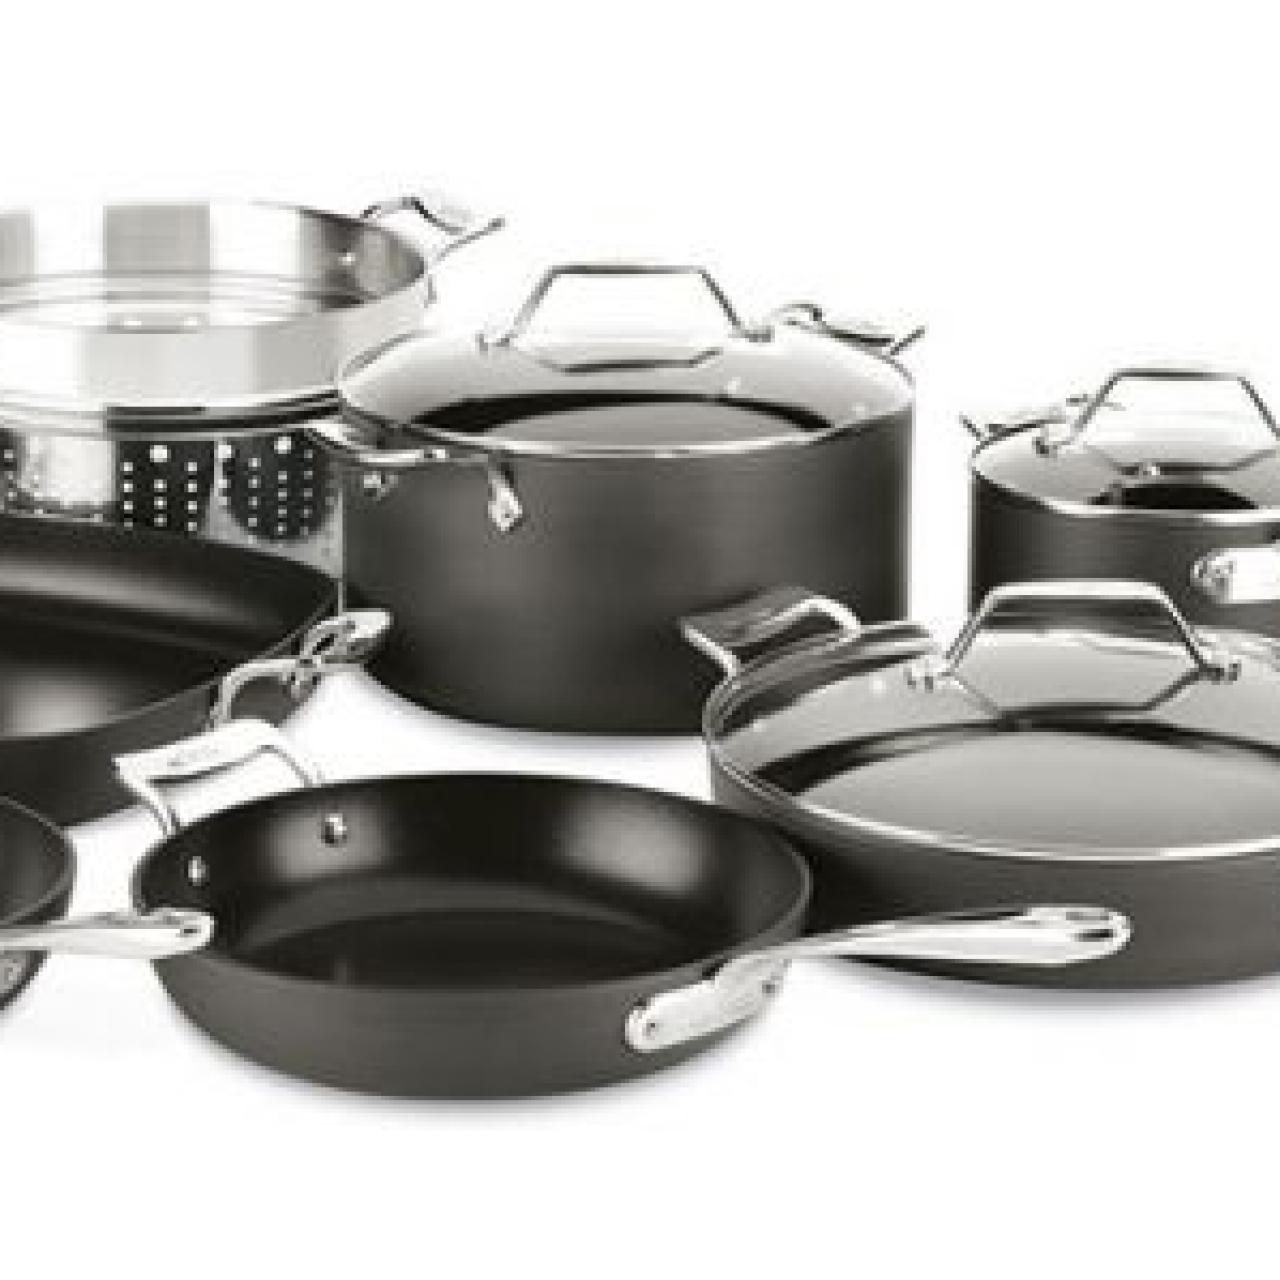 All-Clad Factory Second Cookware Is Up to 60% Off - InsideHook